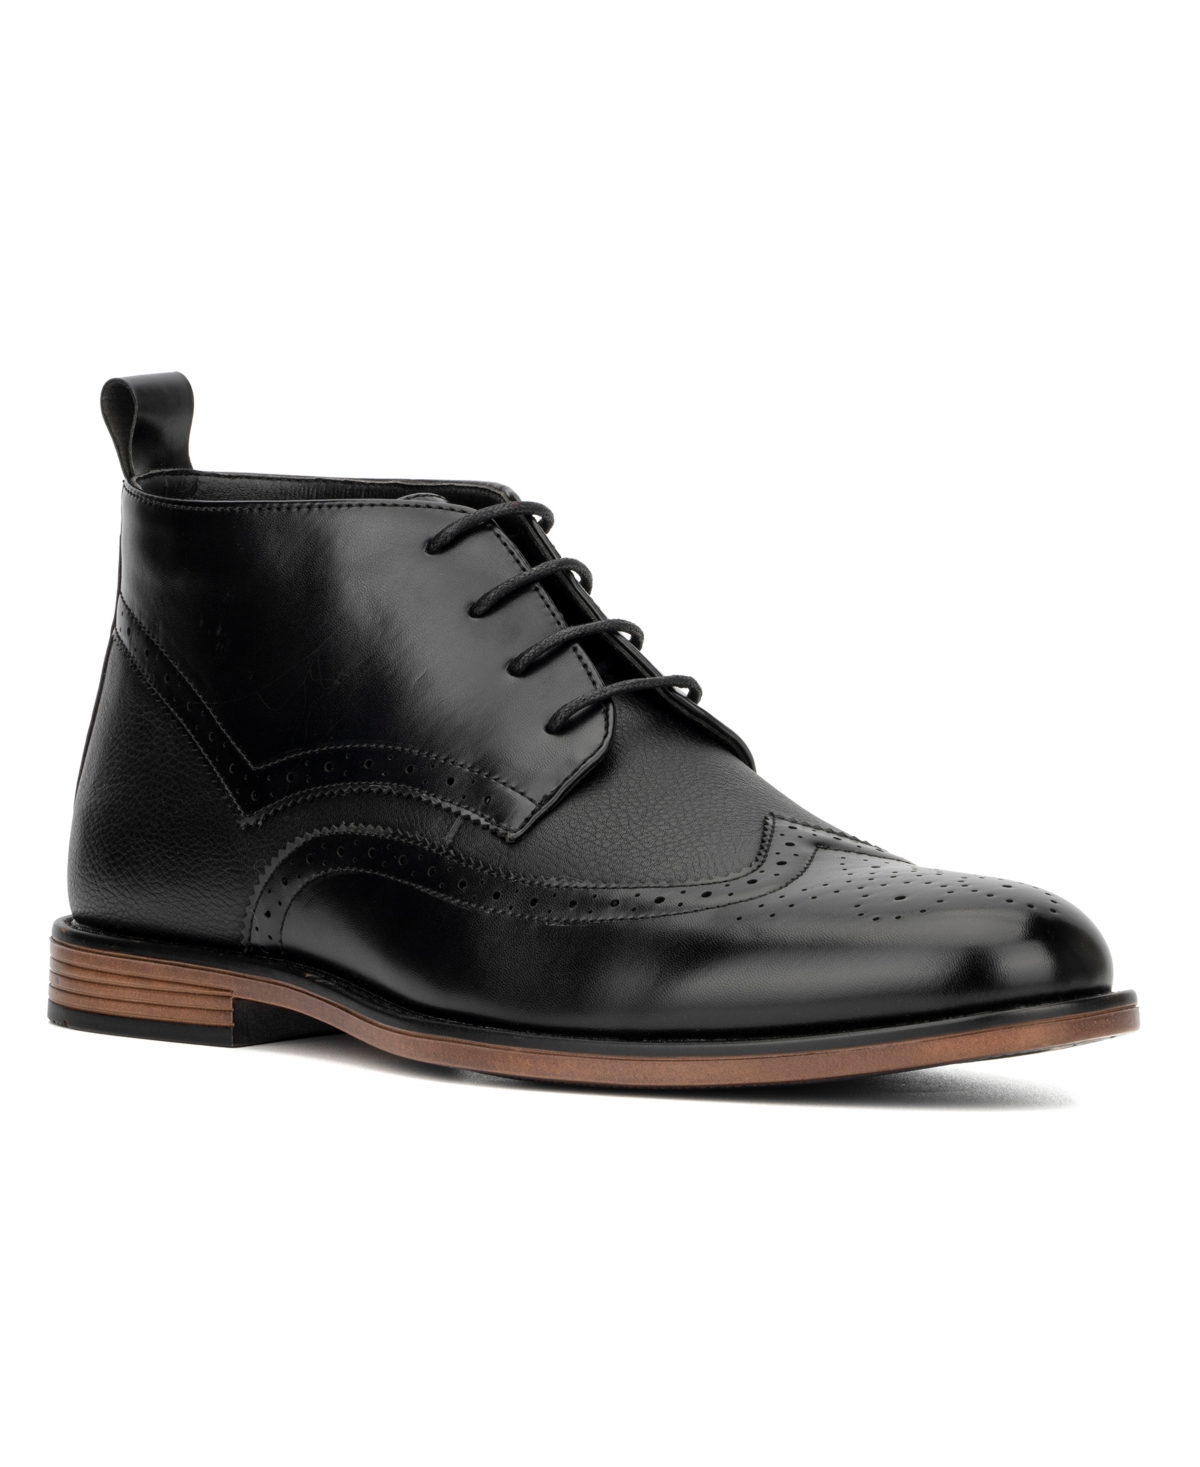 Men's Faux Leather Luciano Boots - Black